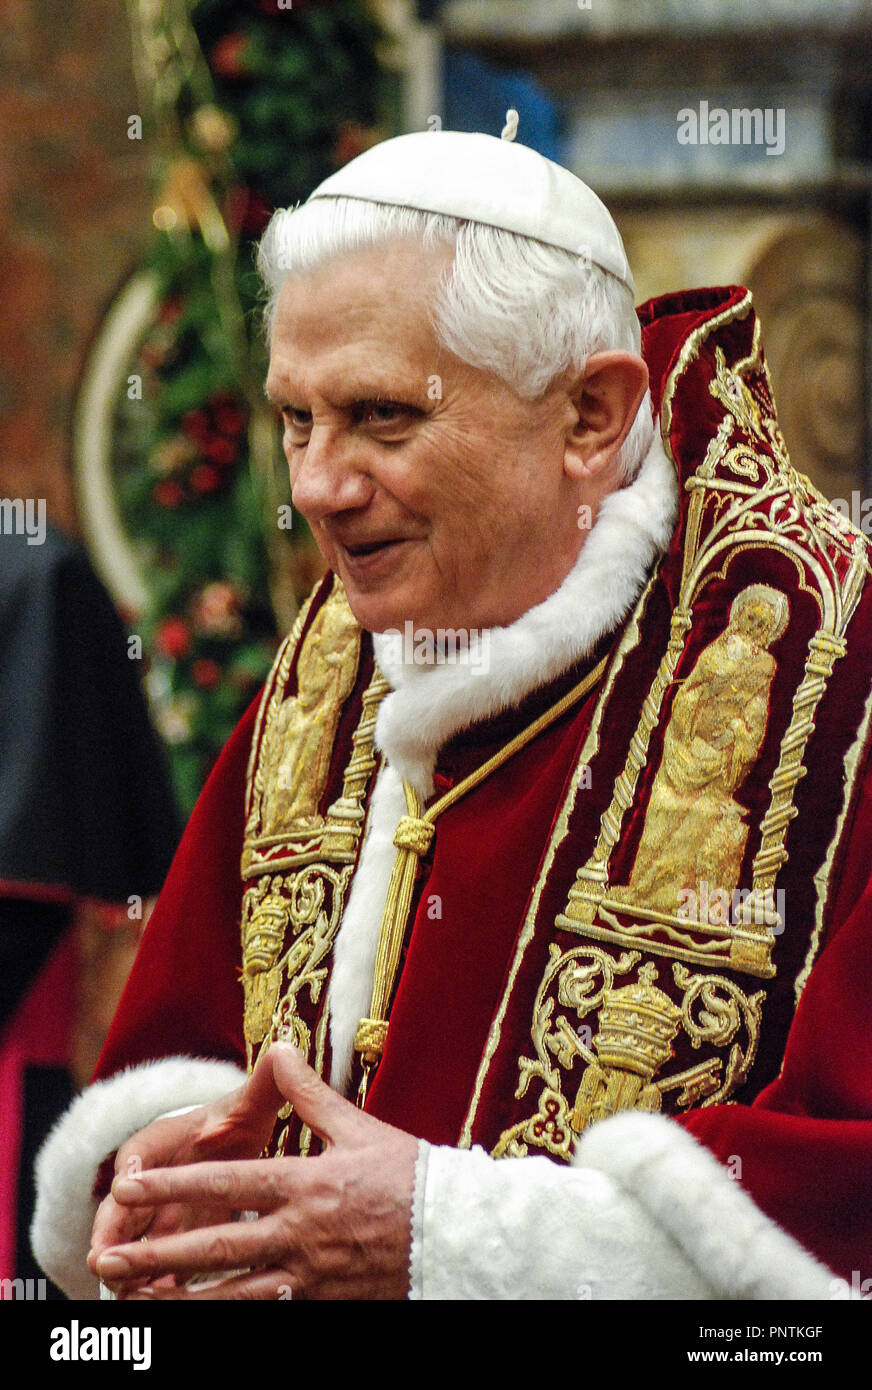 Vatican City -21/12/2007 - Pope Benedict XVI - ADDRESS OF HIS HOLINESS BENEDICT XVI TO THE ROMAN CURIA ON THE OCCASION OF THE PRESENTATION OF THE CHRISTMAS GREETINGS - Sala Clementina Stock Photo